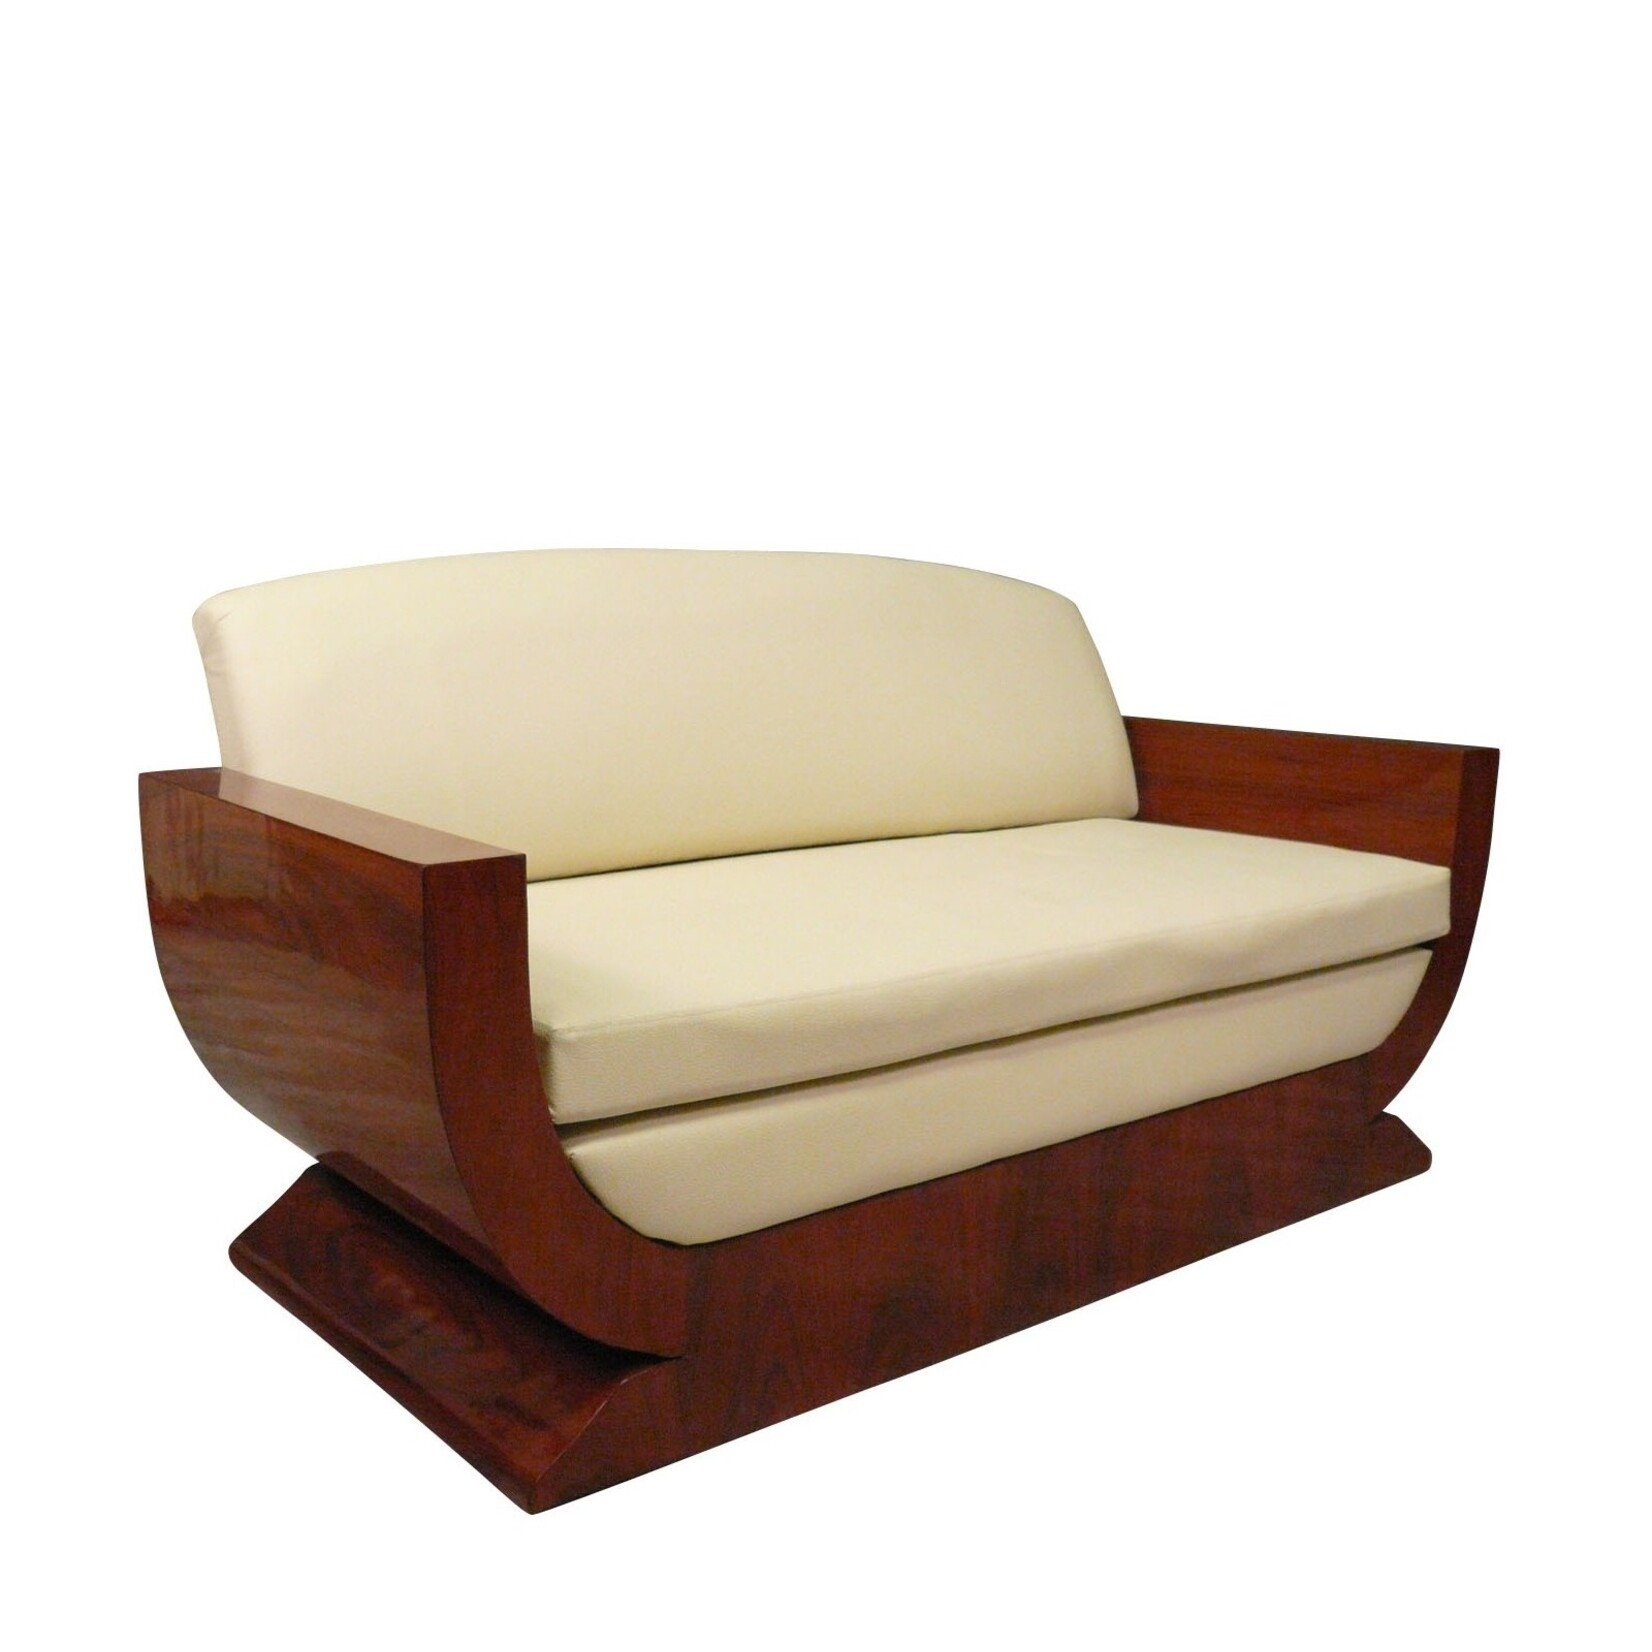 3 seater sofa in art deco style with rosewood marquetry.